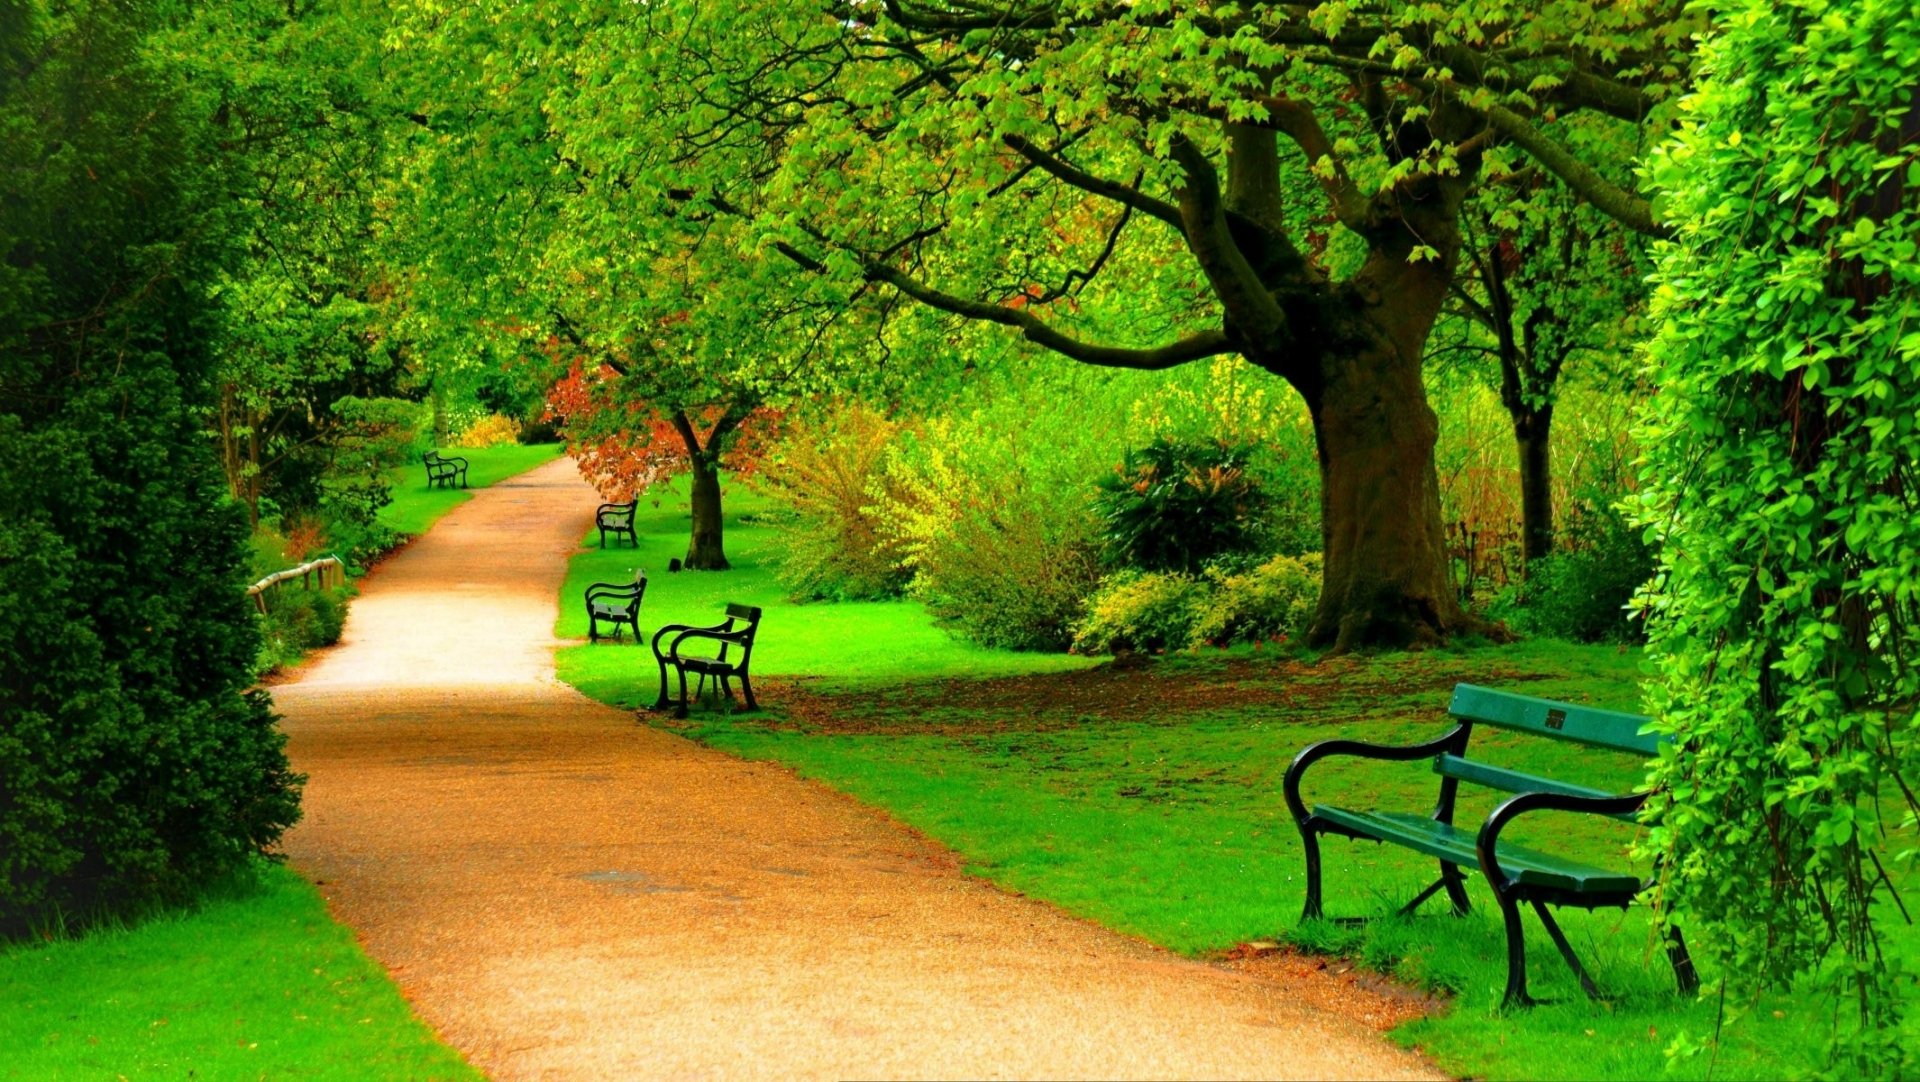 Benches In Green Spring Park Hd Wallpaper Background Image 2130x1200